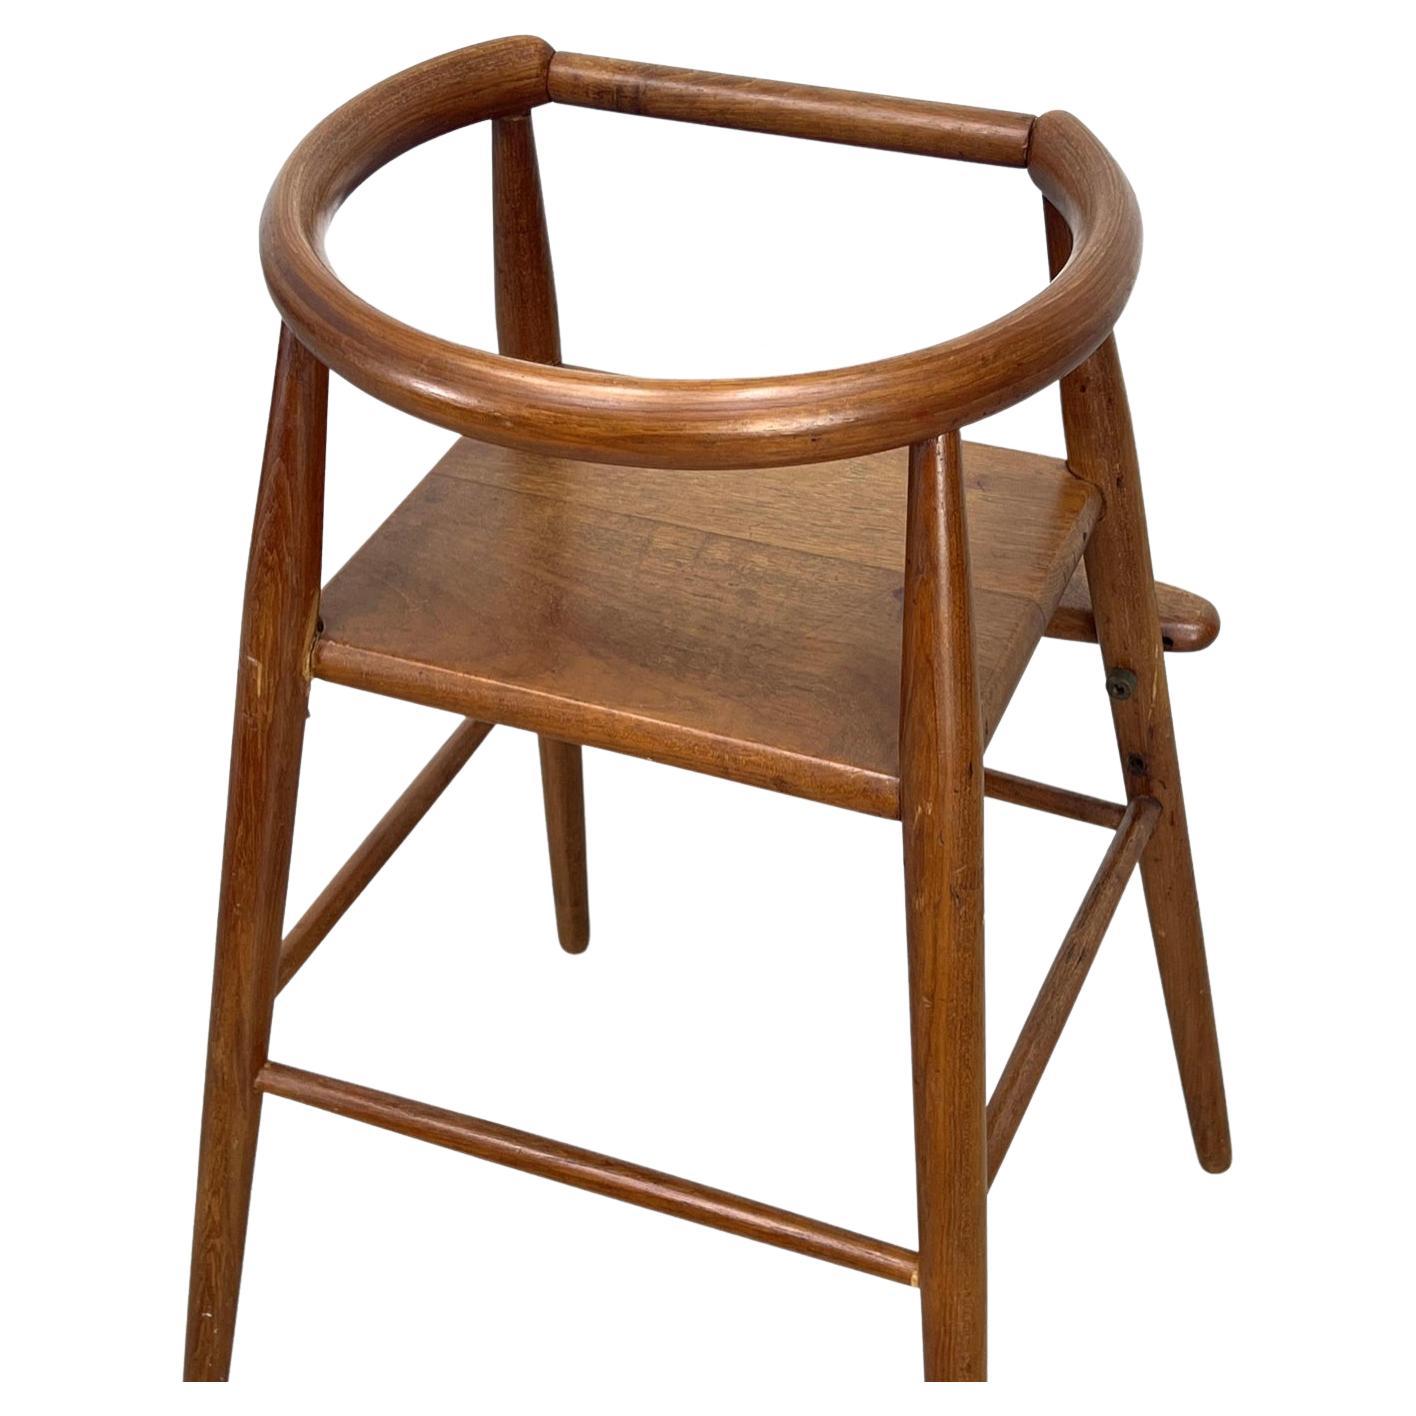 Nanna Ditzel teak Childs high chair stool Danish Mid-Century Modern. Solid teak wood. Made in Denmark. Beautiful design. Circa 1960 - located in Brooklyn NYC

Dimensions: H: 27.5 inches: W: 16 inches: D: 20 inches.